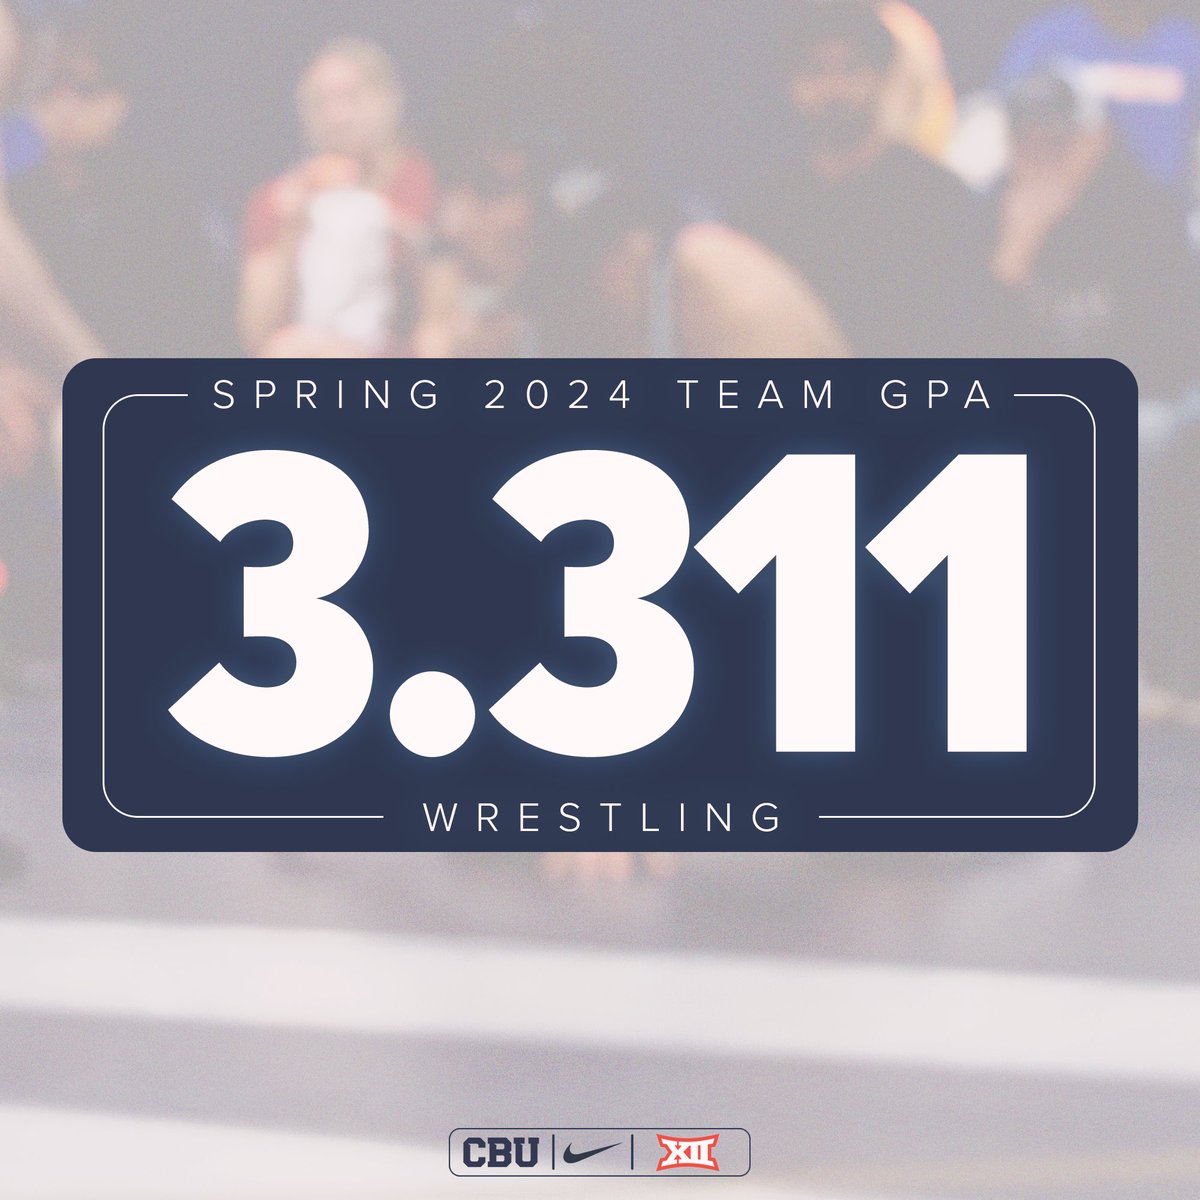 A strong performance in the classroom and on the mat this semester💪

#LanceUp⚔️